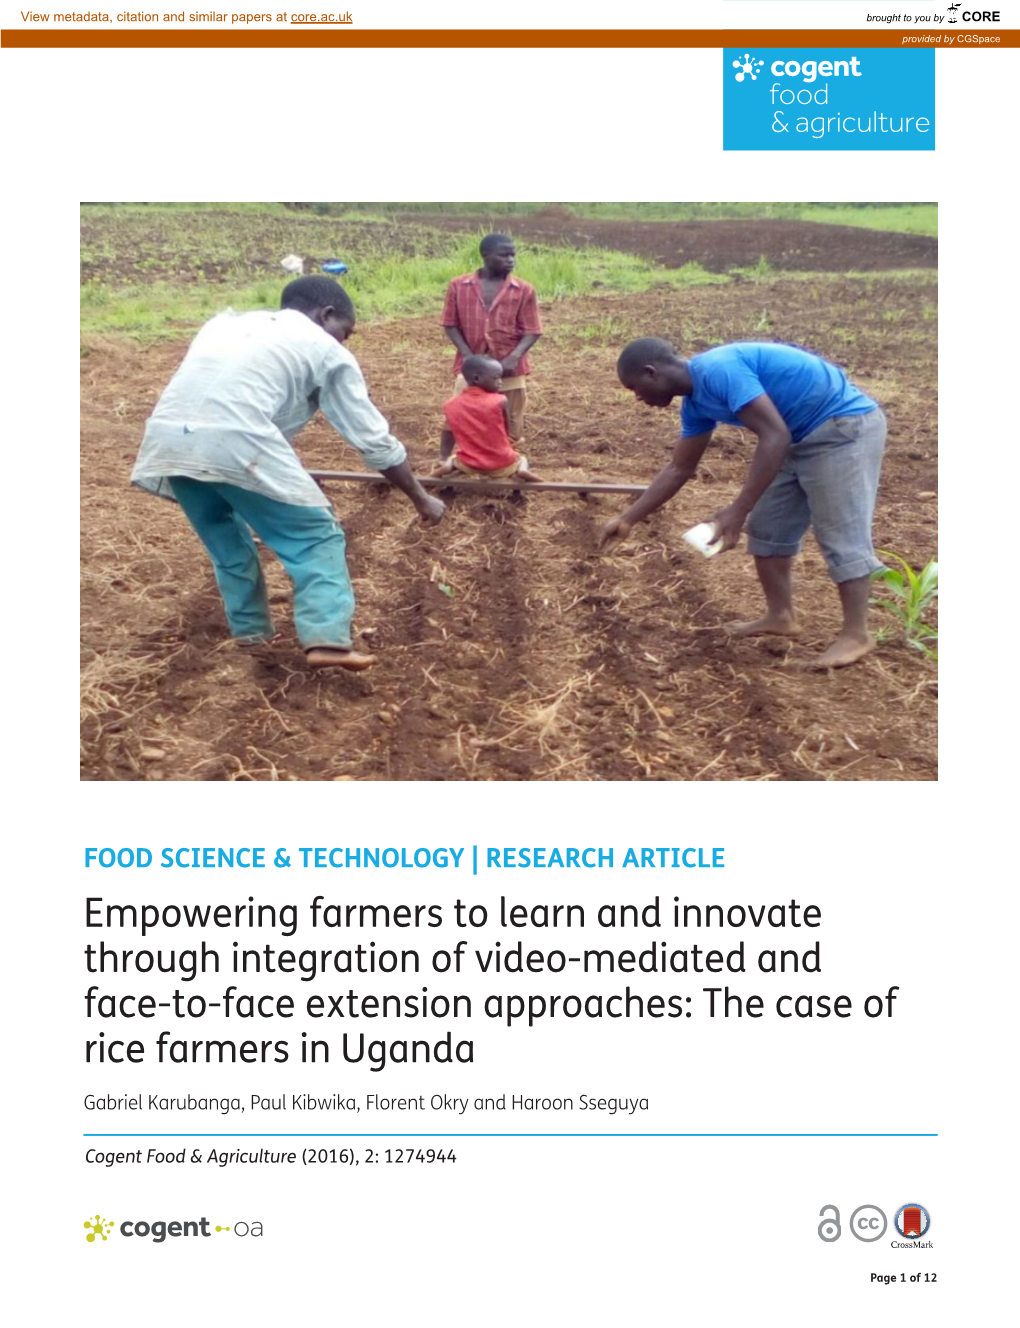 Empowering Farmers to Learn and Innovate Through Integration of Video-Mediated and Face-To-Face Extension Approaches: the Case of Rice Farmers in Uganda